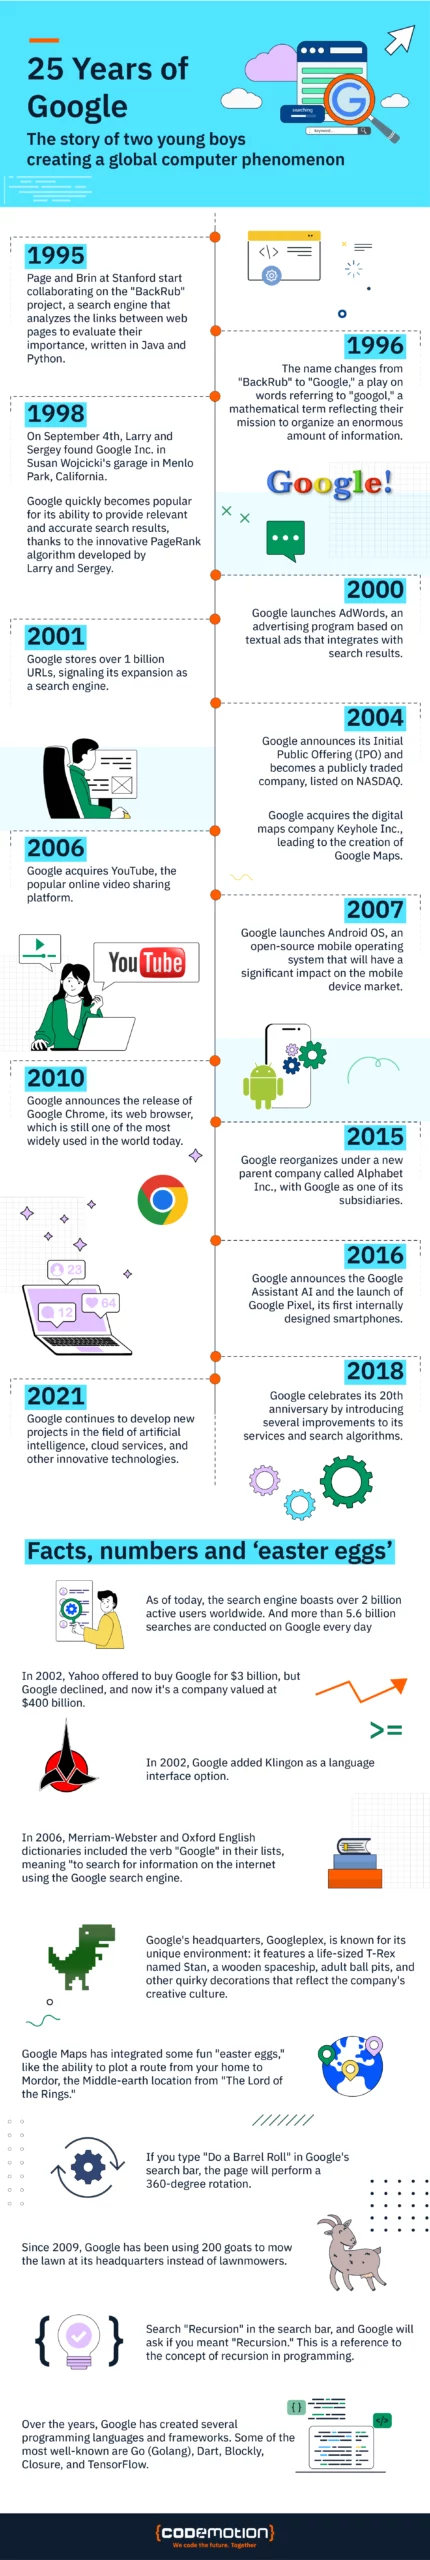 25 years of google, an infographic explaining the history of the tech giant from the beginnings to today. Story of google.